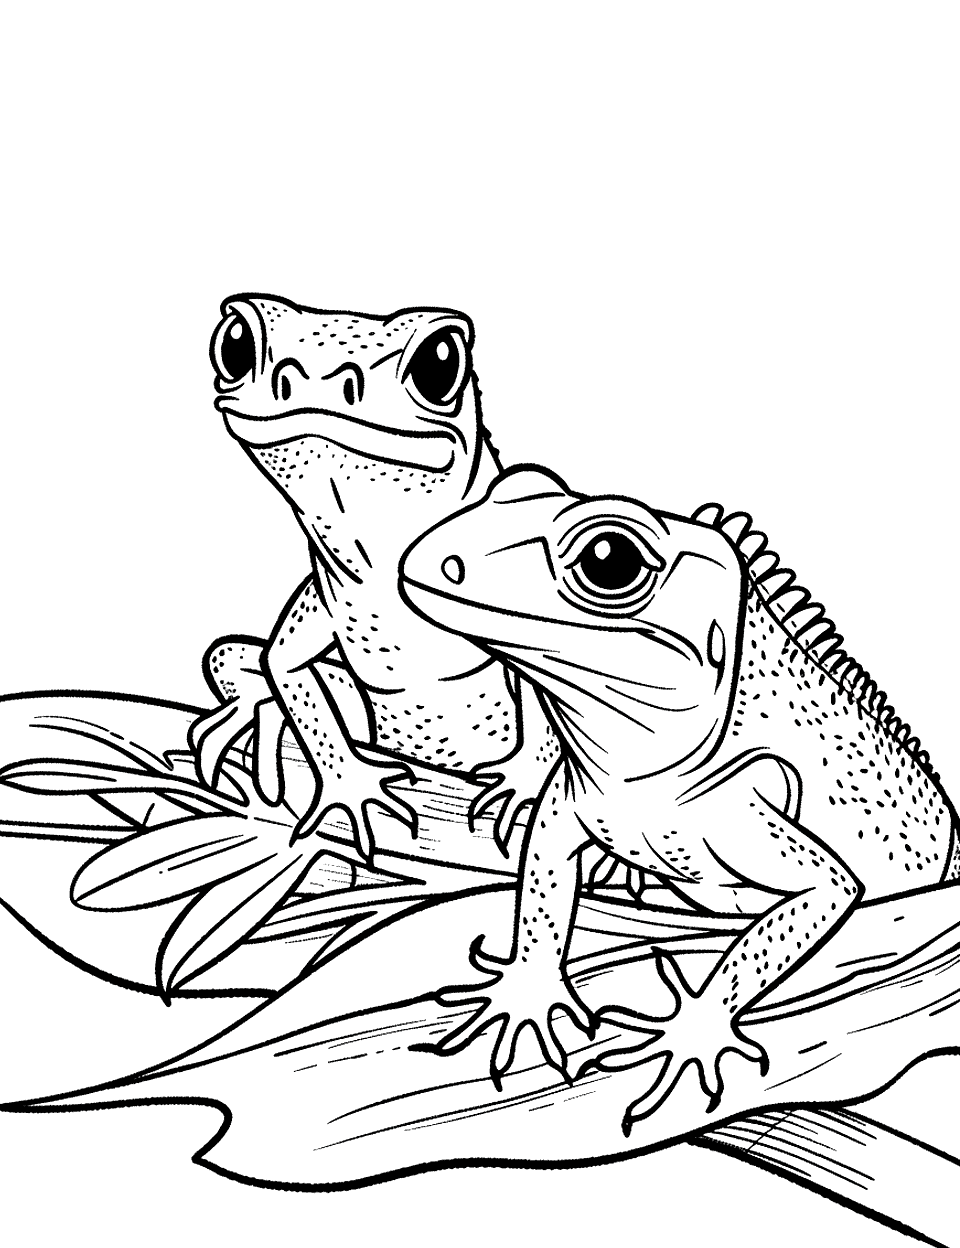 Gecko and Iguana Friends Lizard Coloring Page - A gecko and an iguana sitting together, sharing a large leaf for shade.